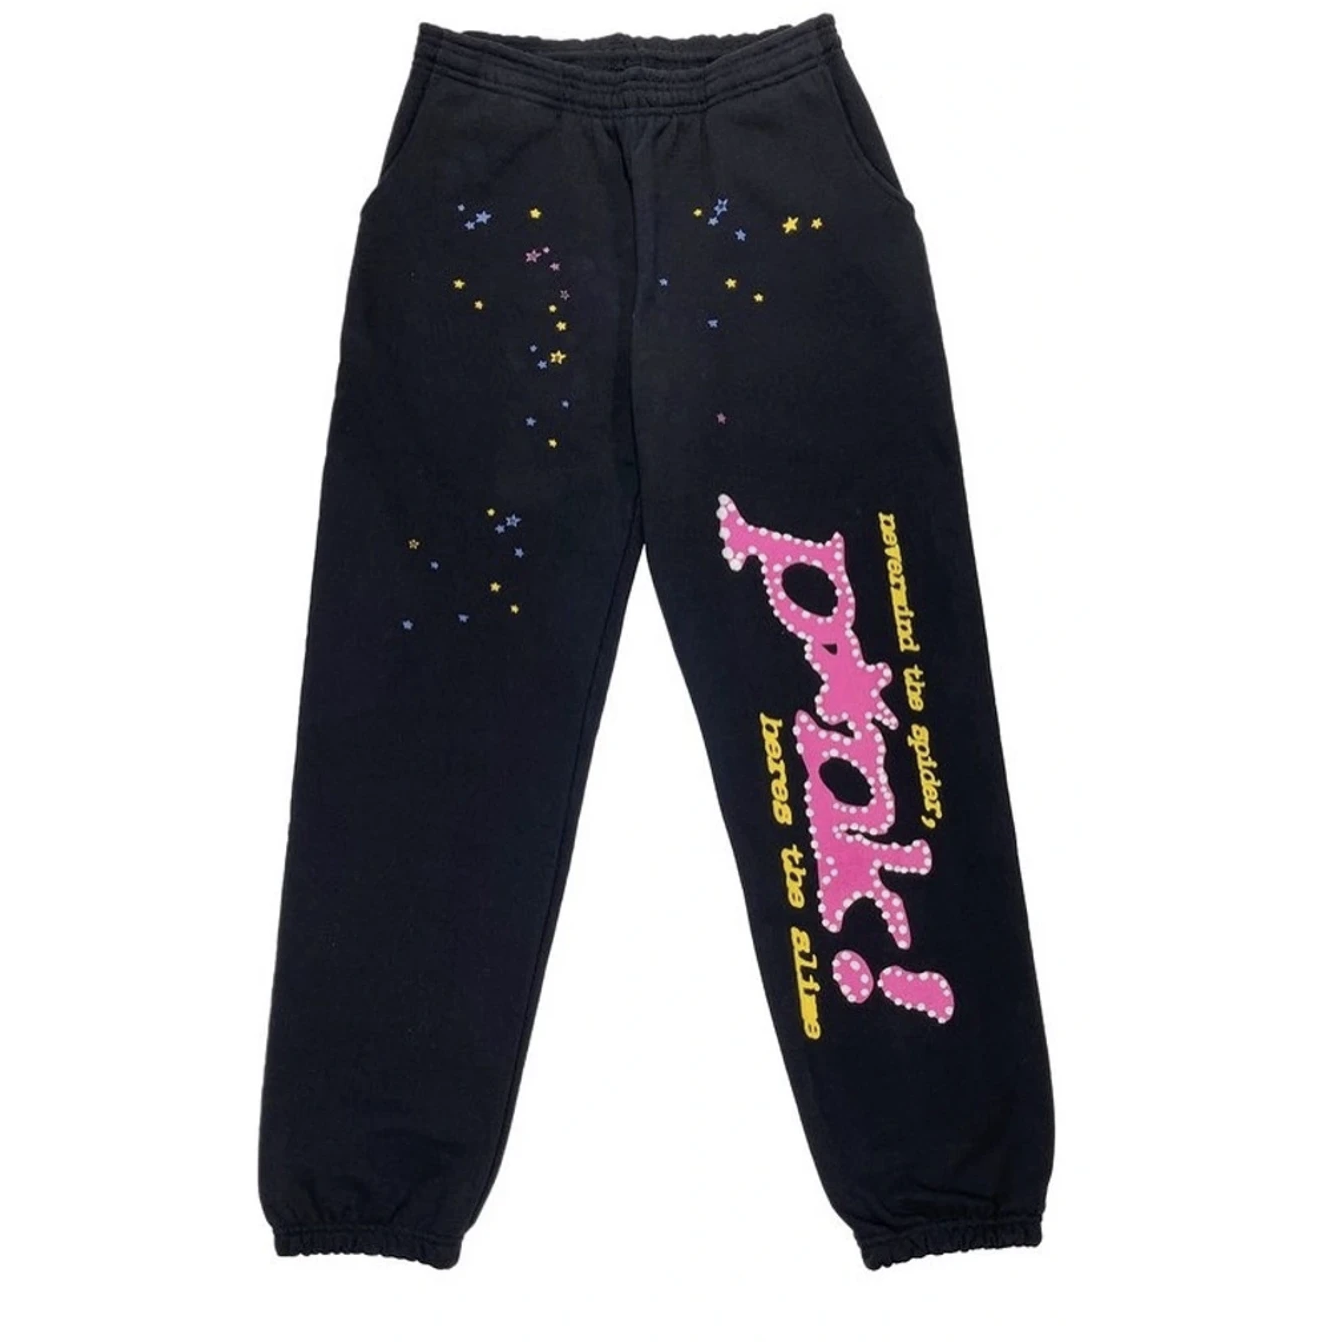 Sp5der P*NK Sweatpants Black from Young Thug